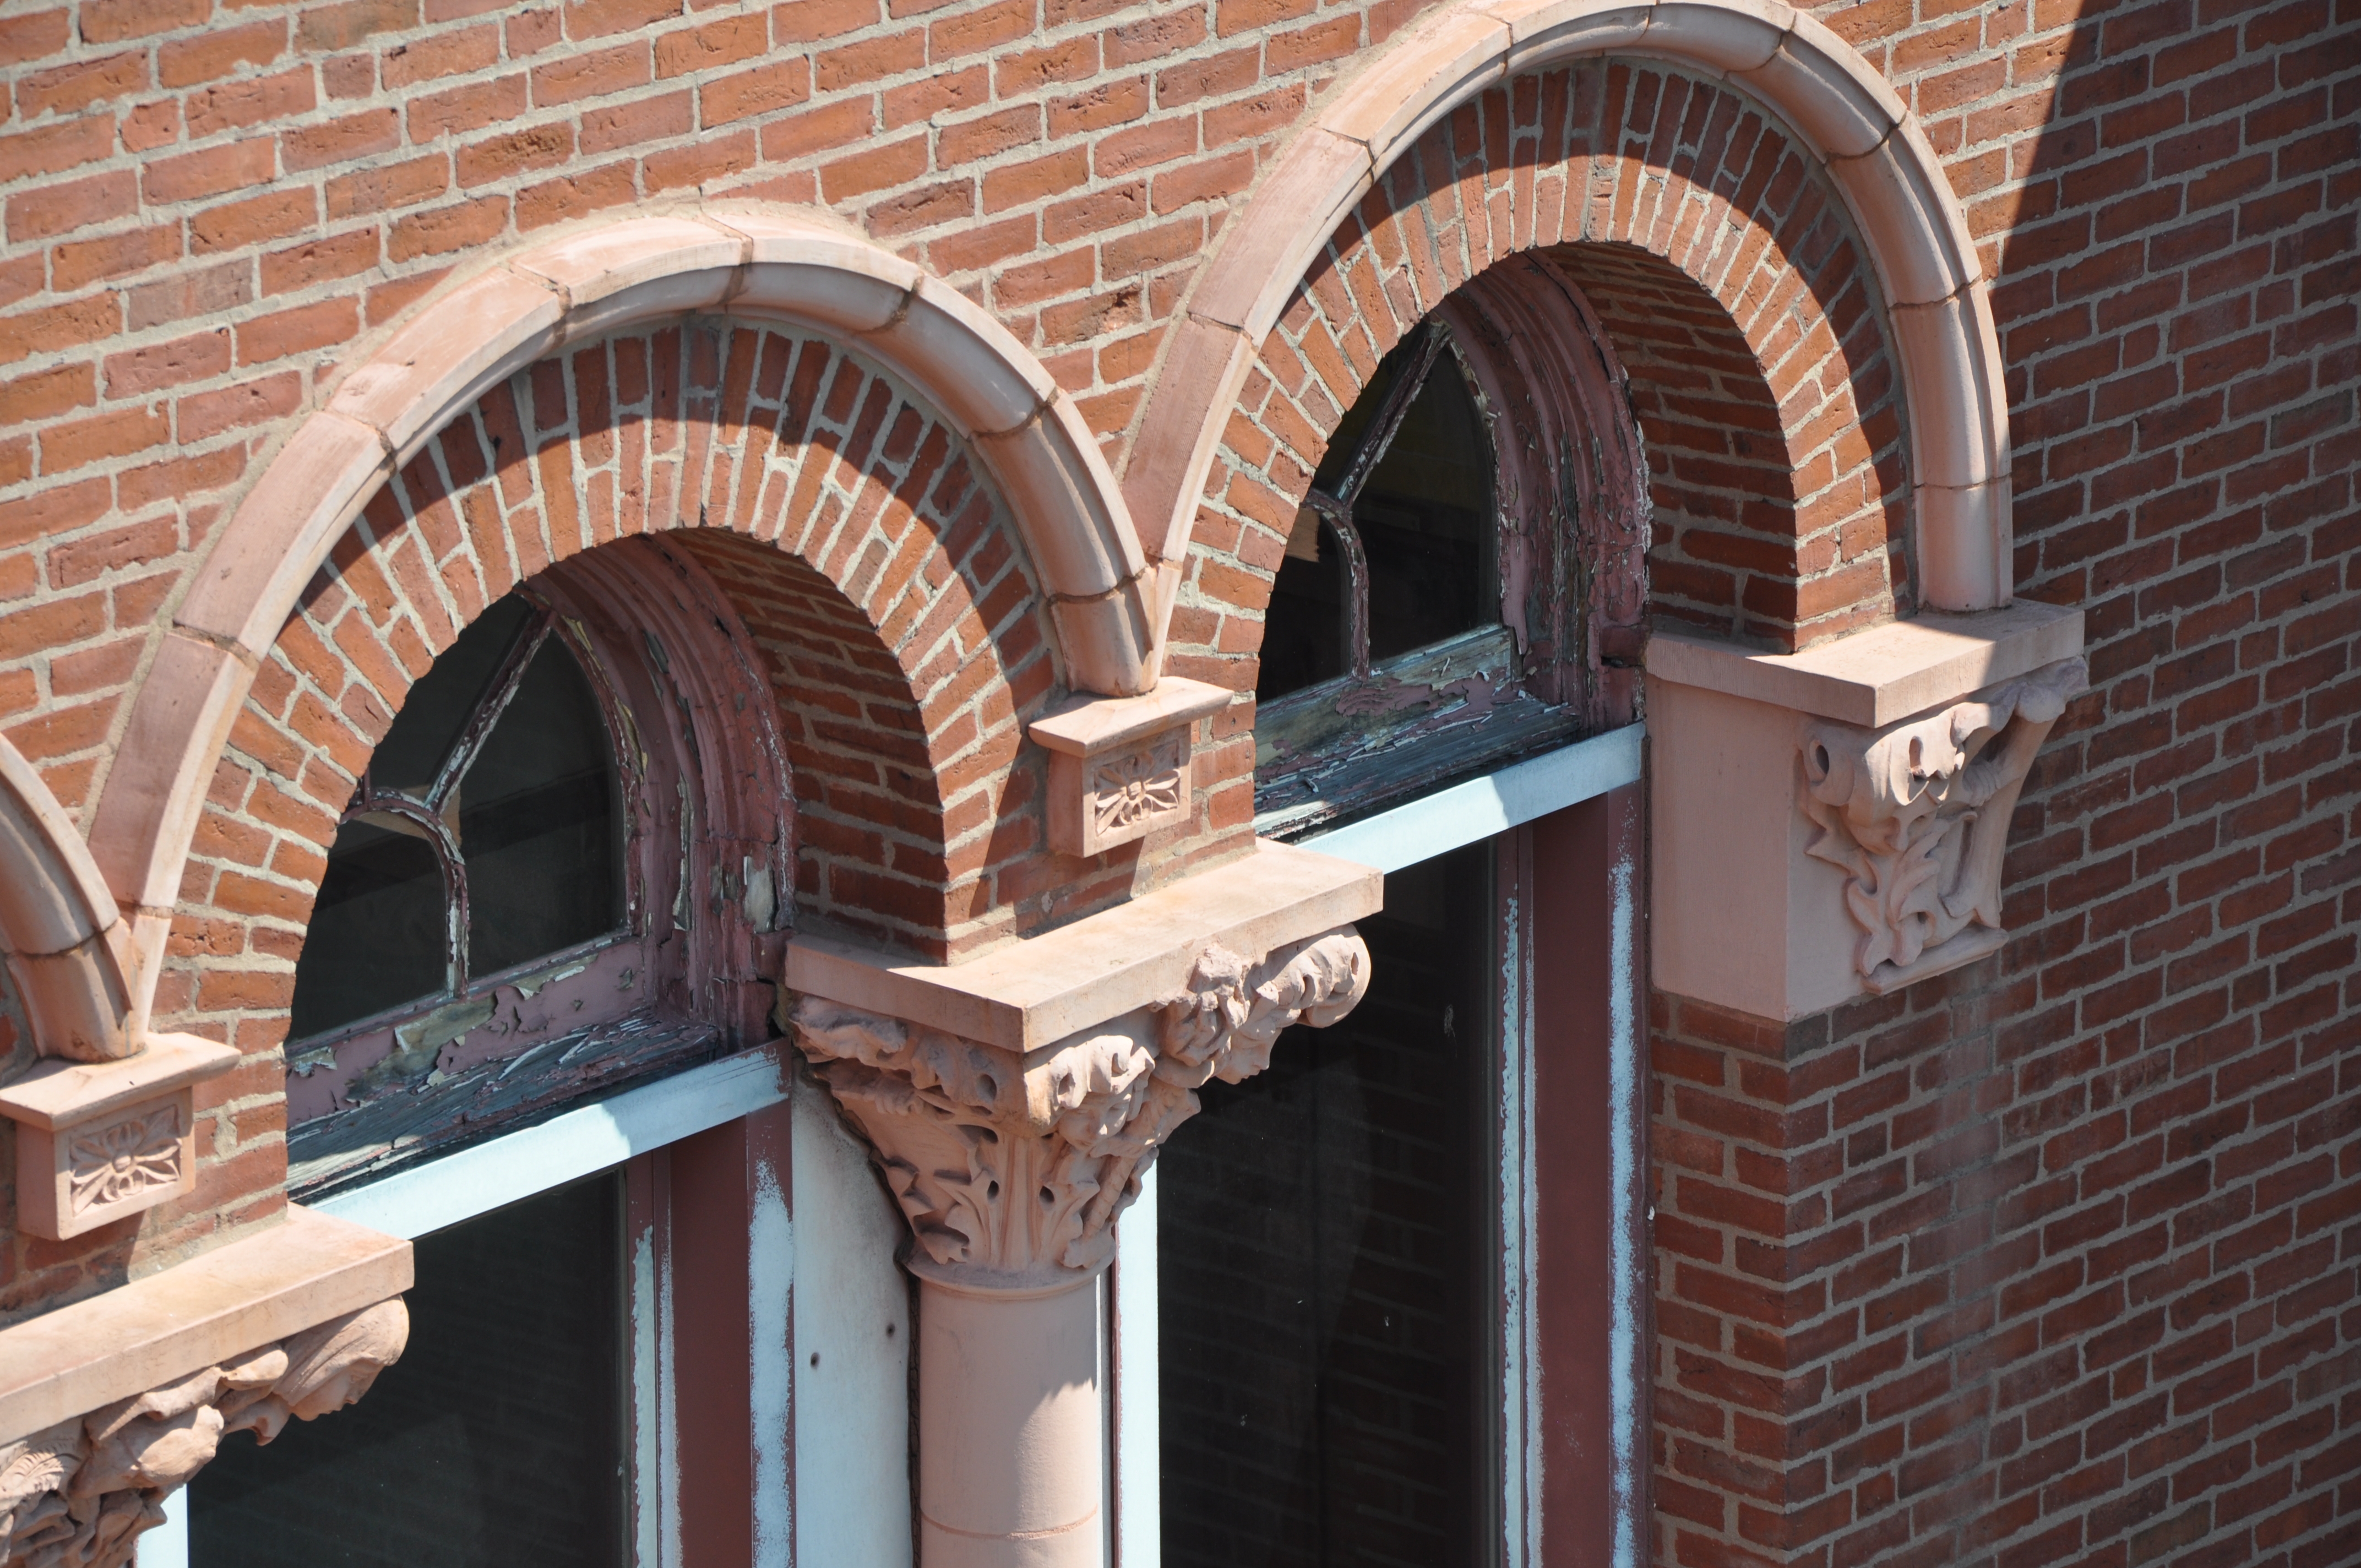 the existing Somerville High School arches